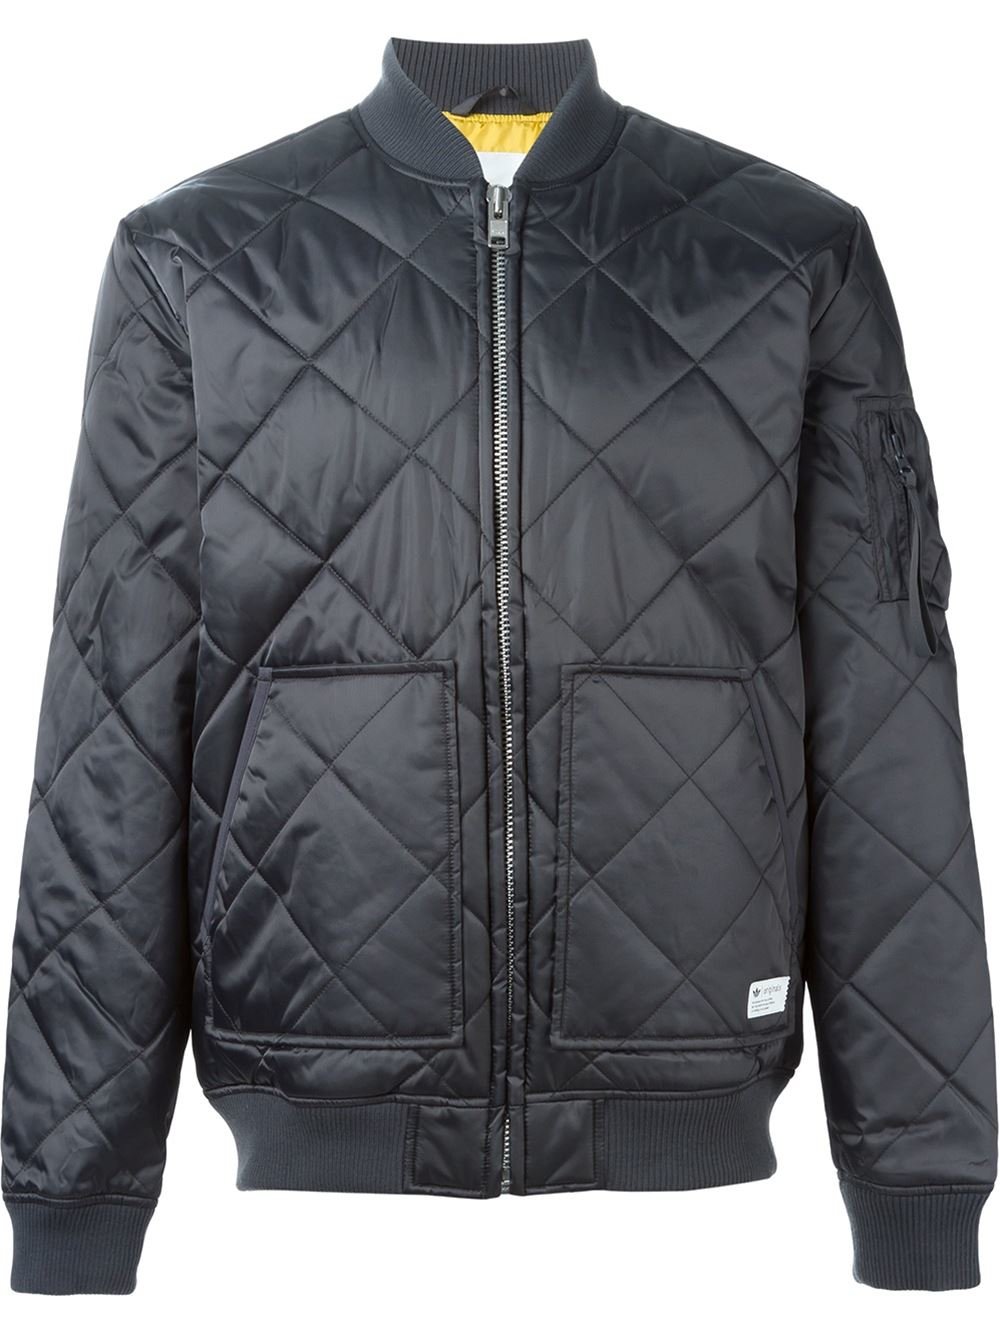 adidas Originals Quilted Bomber Jacket in Grey (Grey) for Men - Lyst